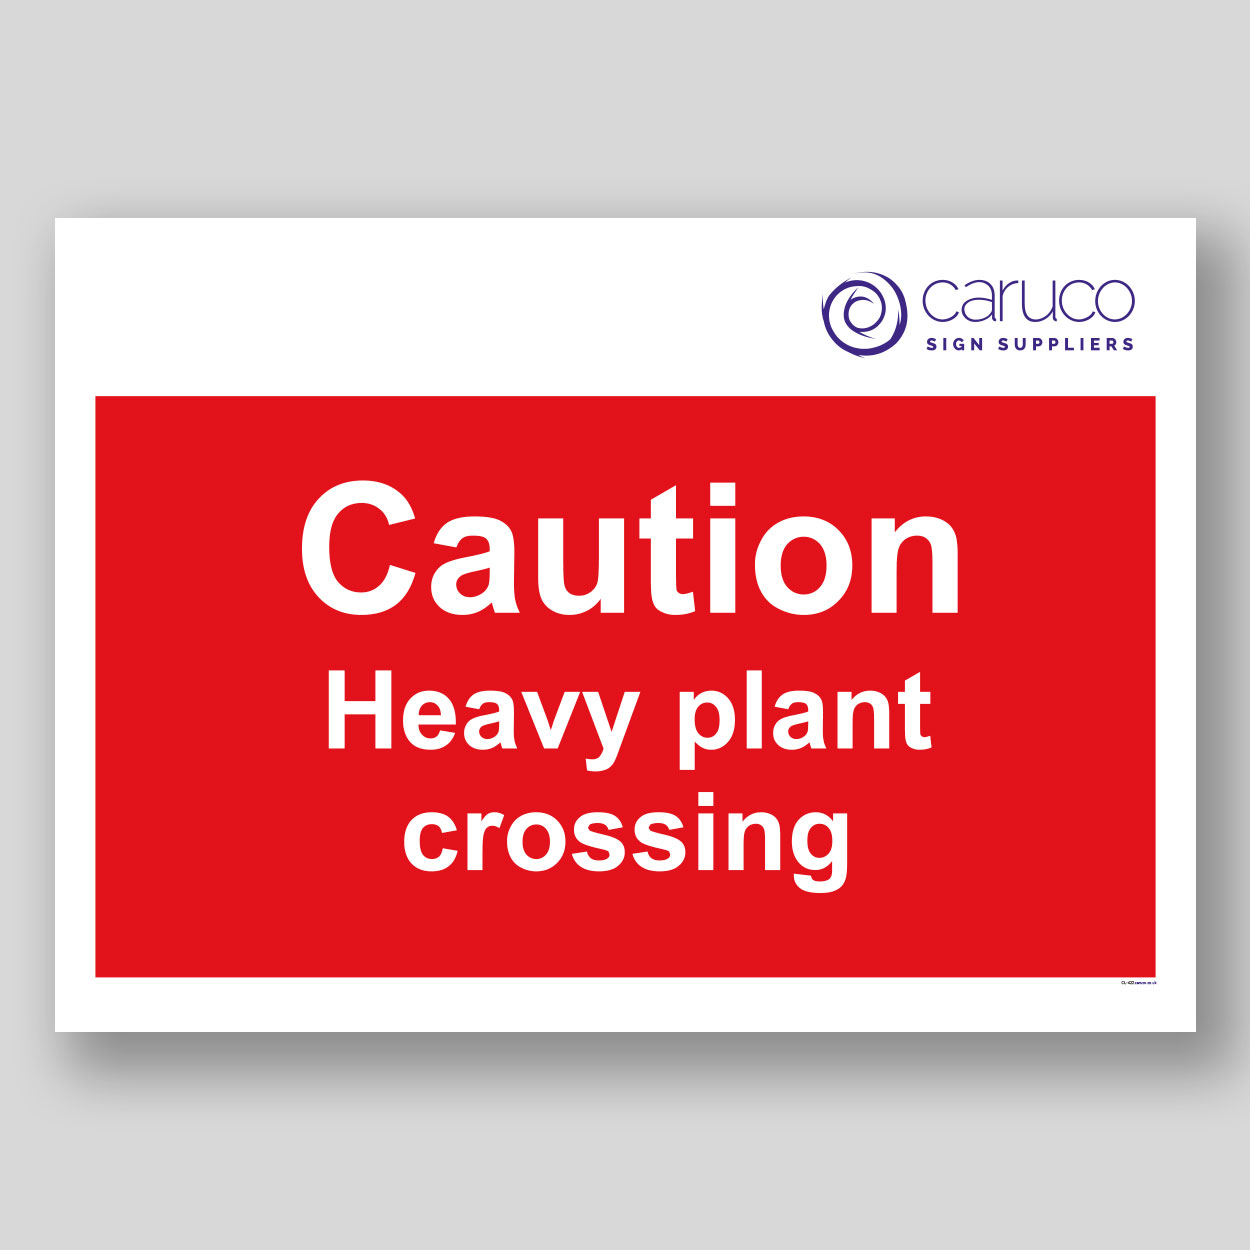 CL-422 Caution - heavy plant crossing